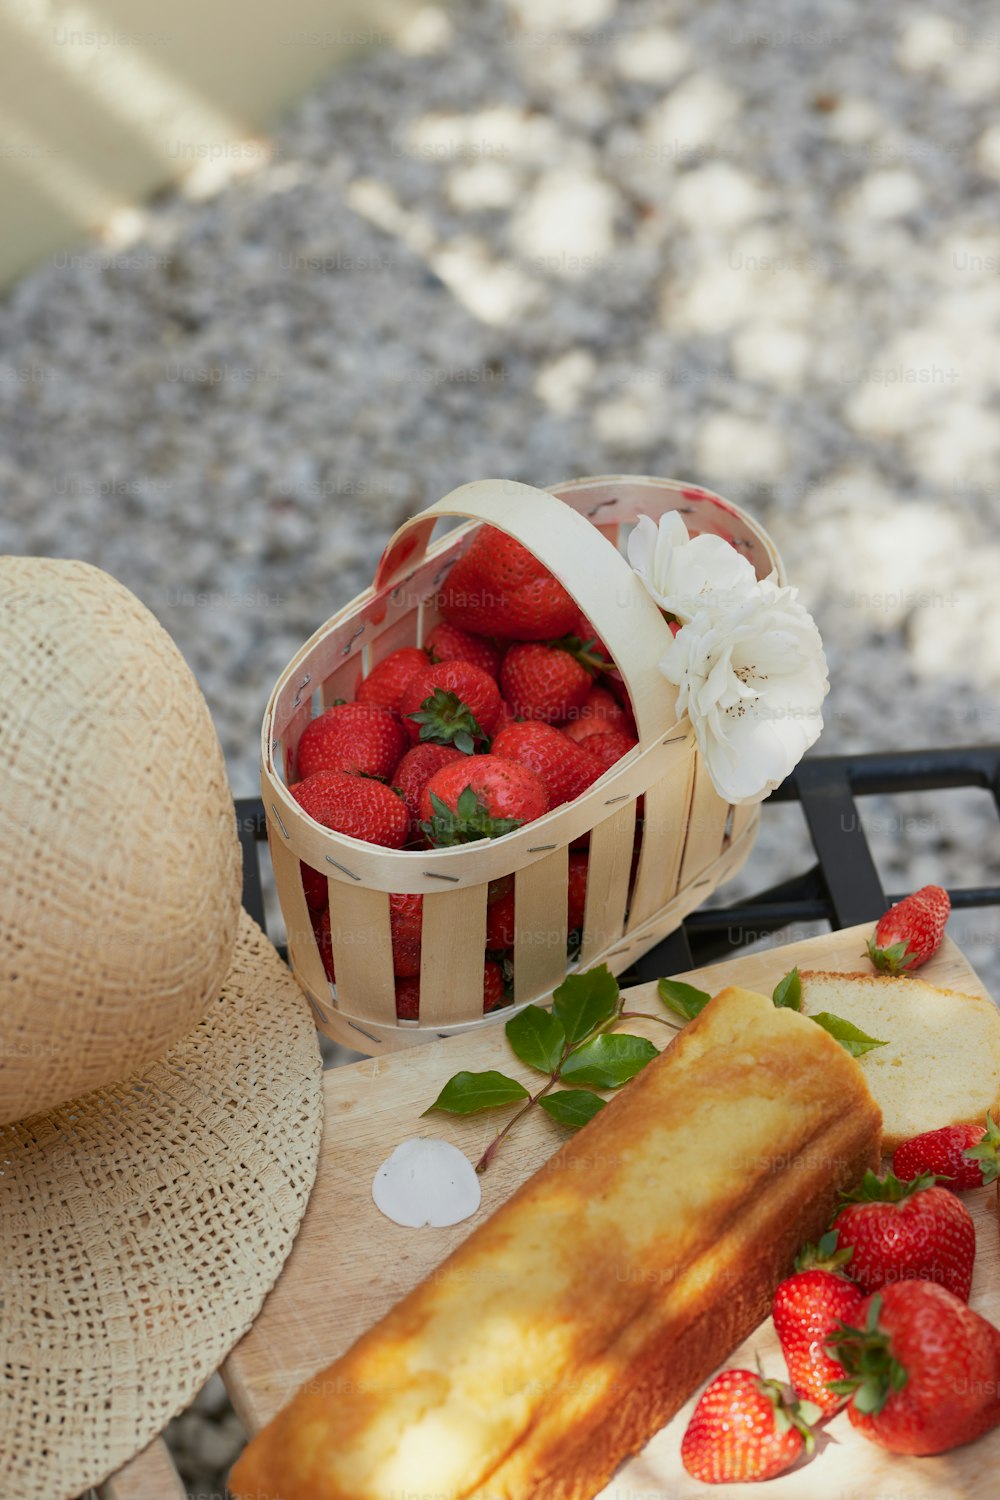 a basket of strawberries sitting next to a piece of bread